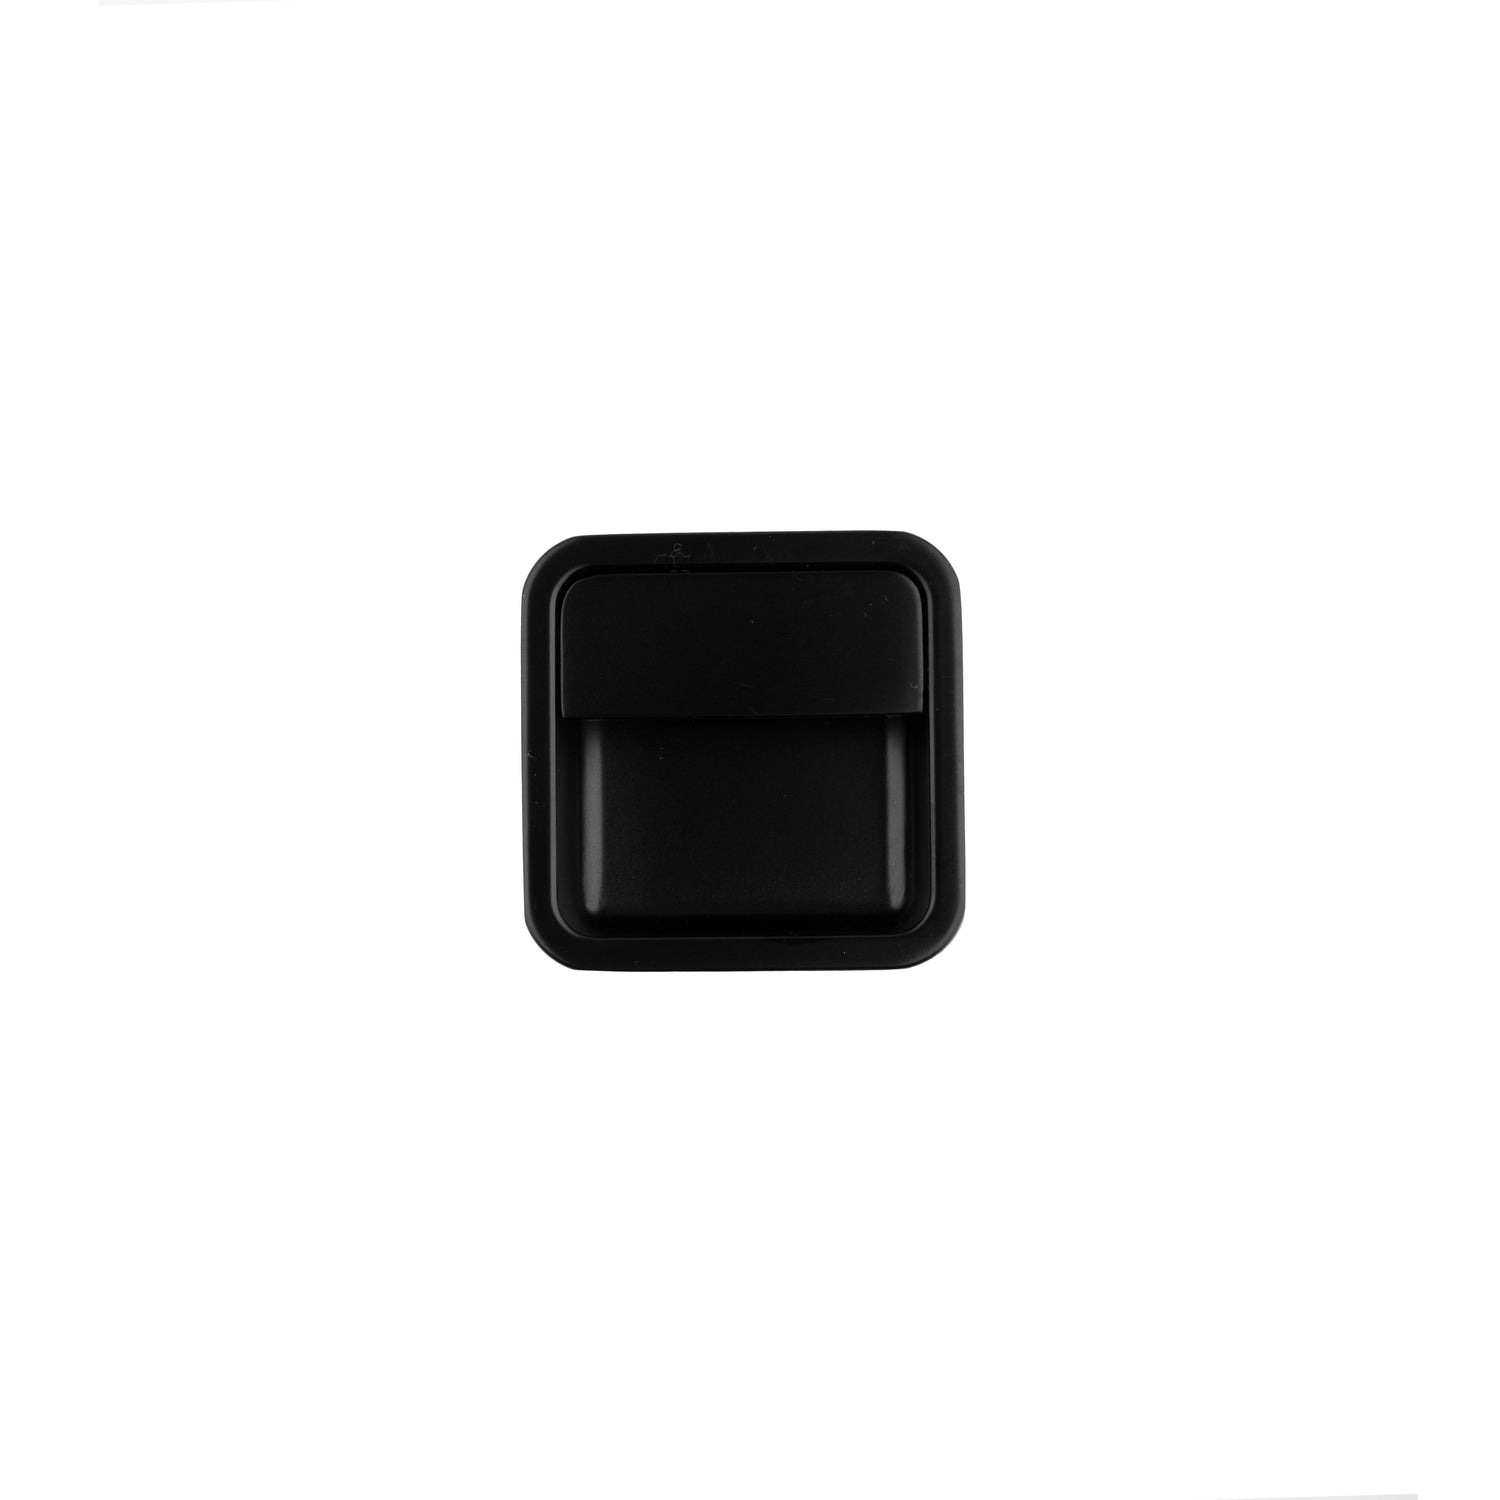 Concealed Semi Square Handle Knob - M A N T A R A